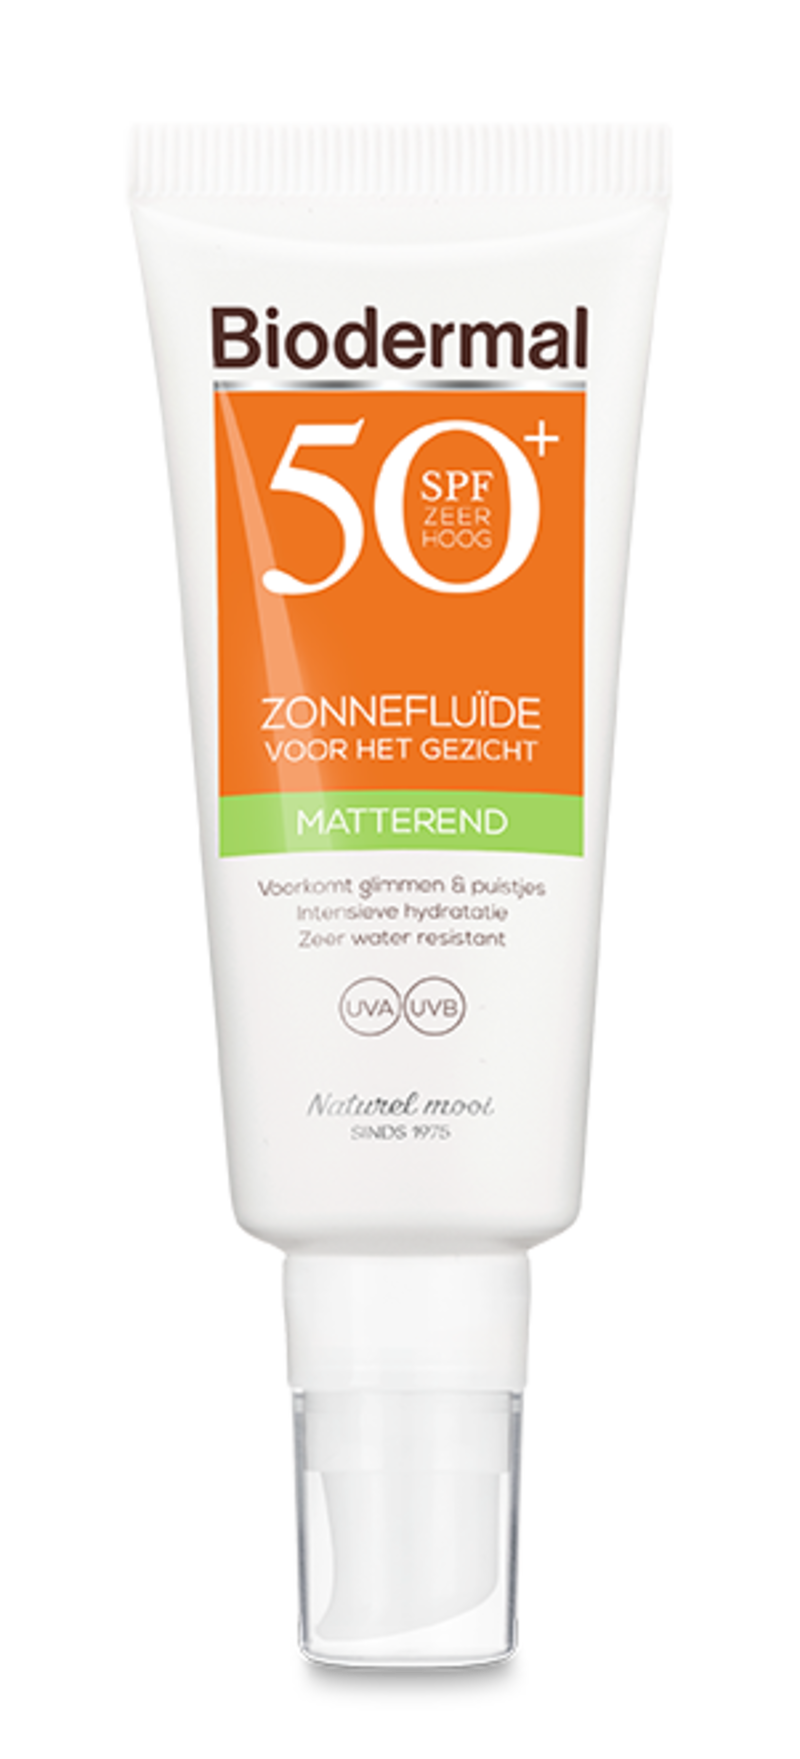 review image https://cdn.weareeves.com/shopify/s/files/1/0012/9669/5349/products/Matterende-zonnefluide-SPF50-40ml_TUBE-copy-1.png